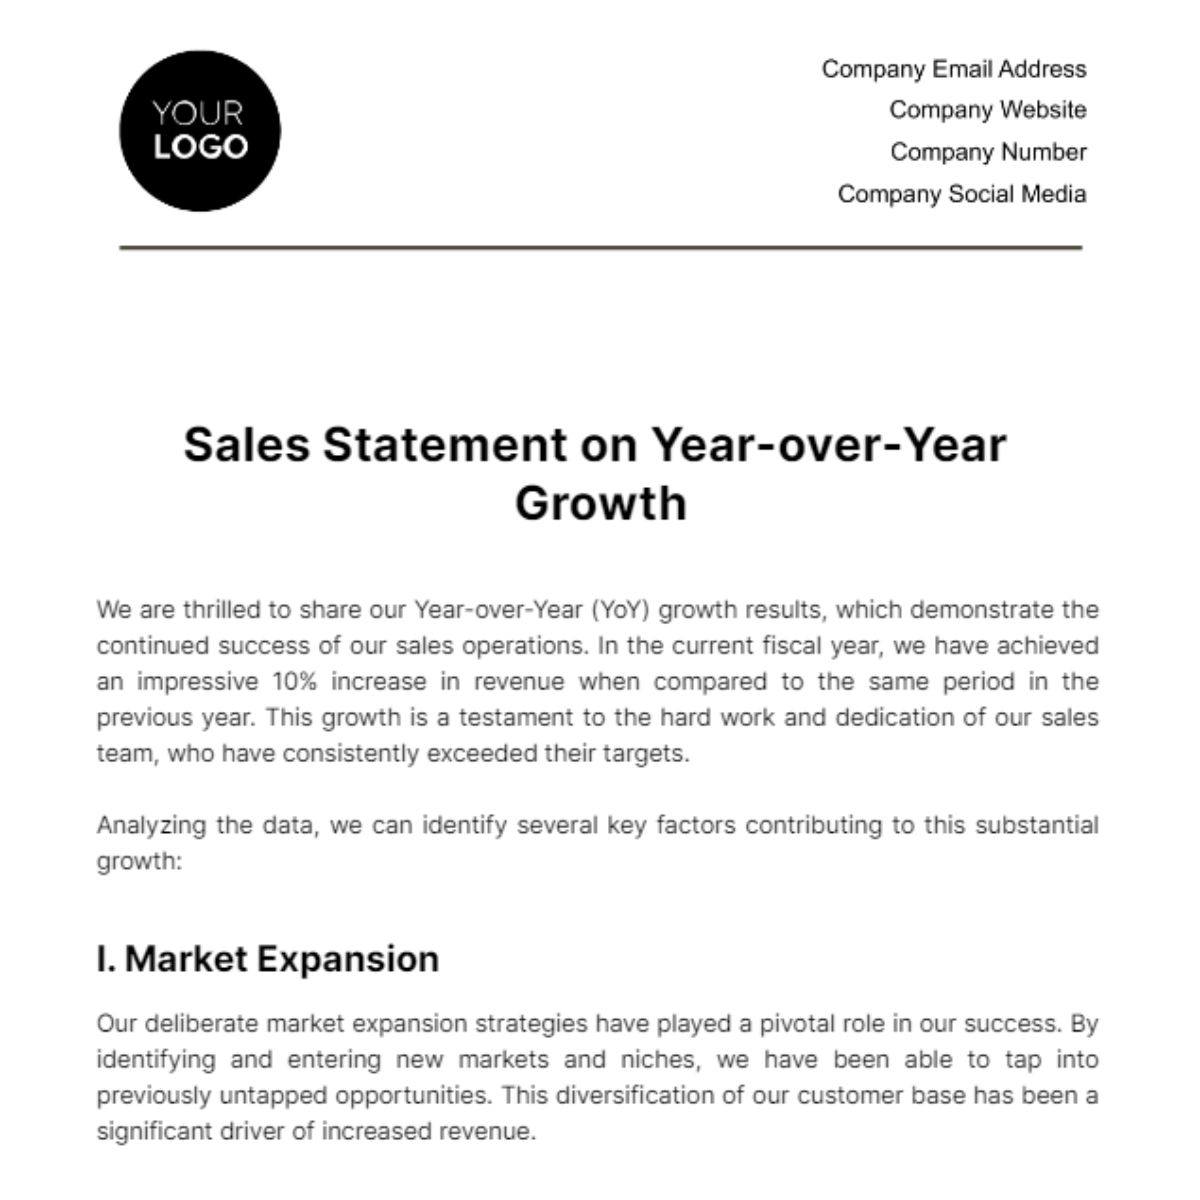 Free Sales Statement on Year-over-Year Growth Template